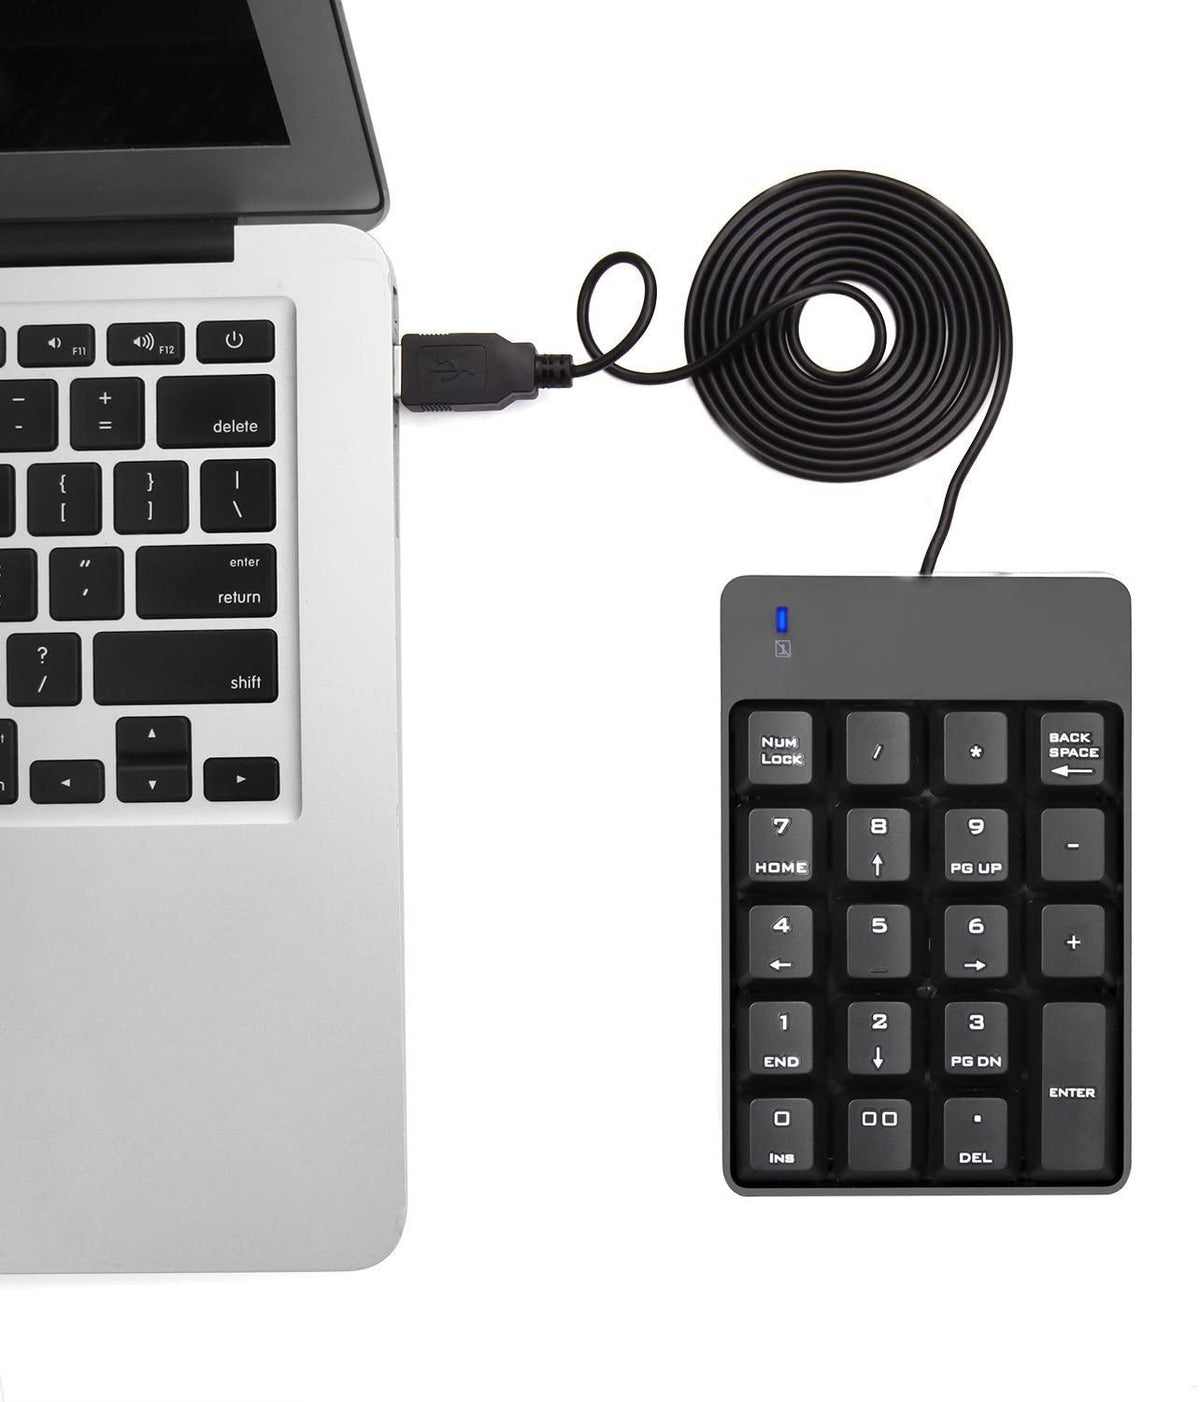 USB Numeric Keypad, Jelly Comb 19 Key Wired Mini Number Keyboard For Laptop Desktop Computer PC - Black